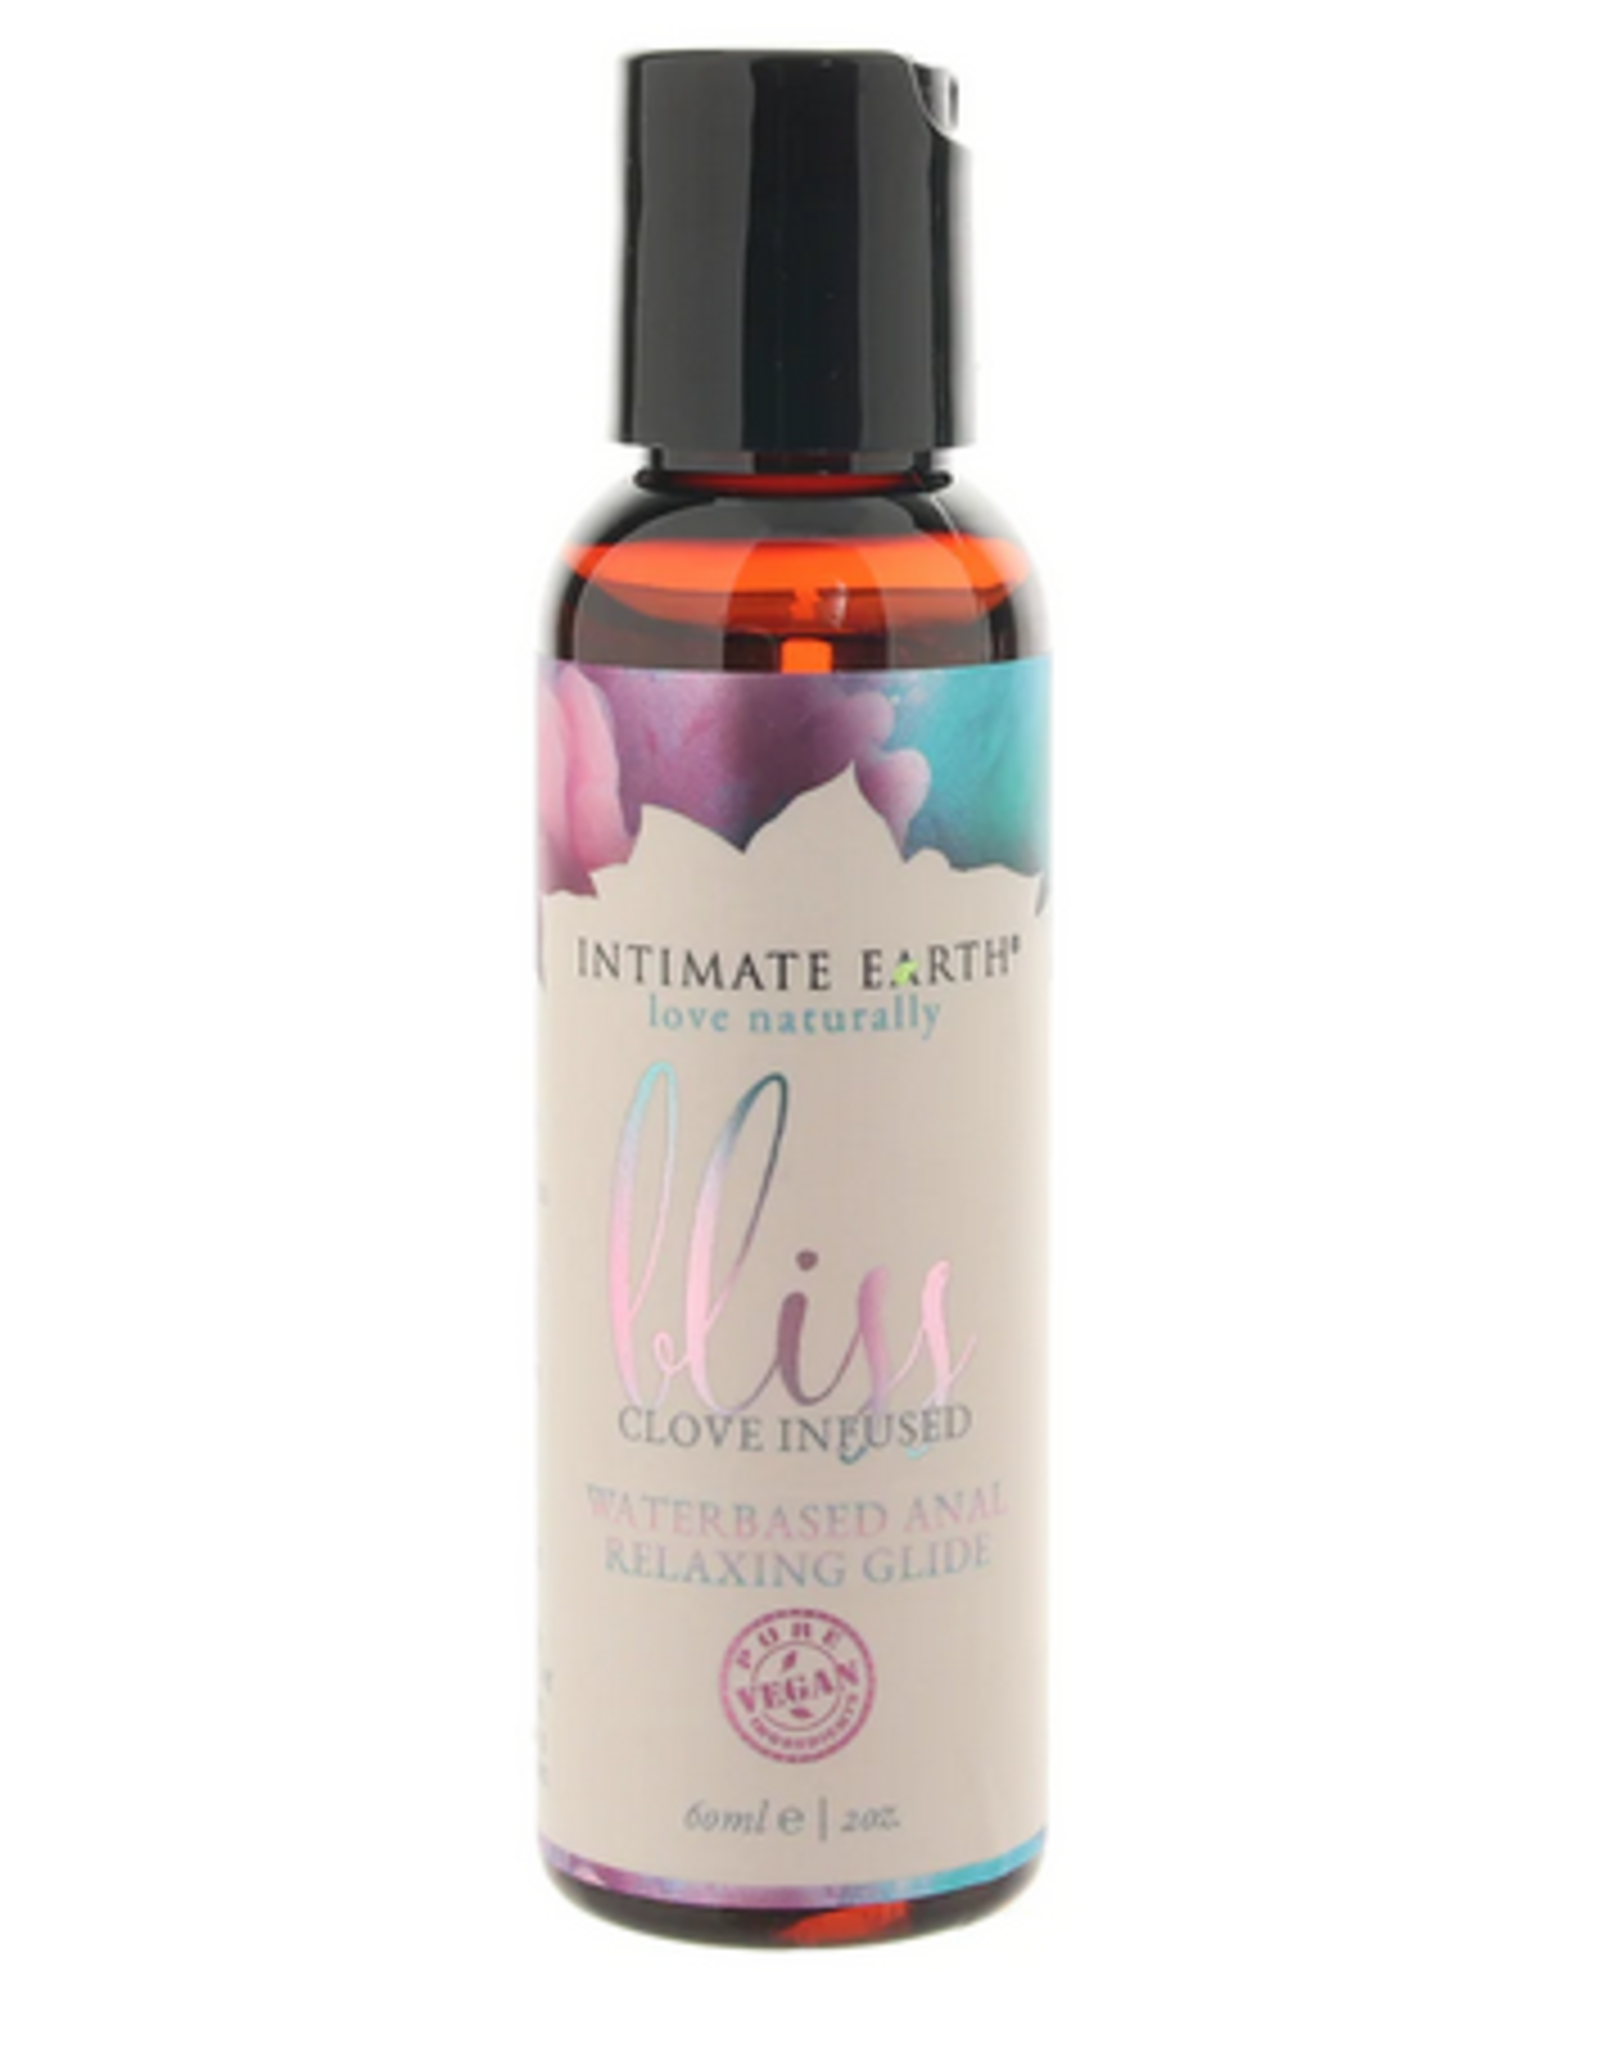 Intimate Earth - Bliss 2oz